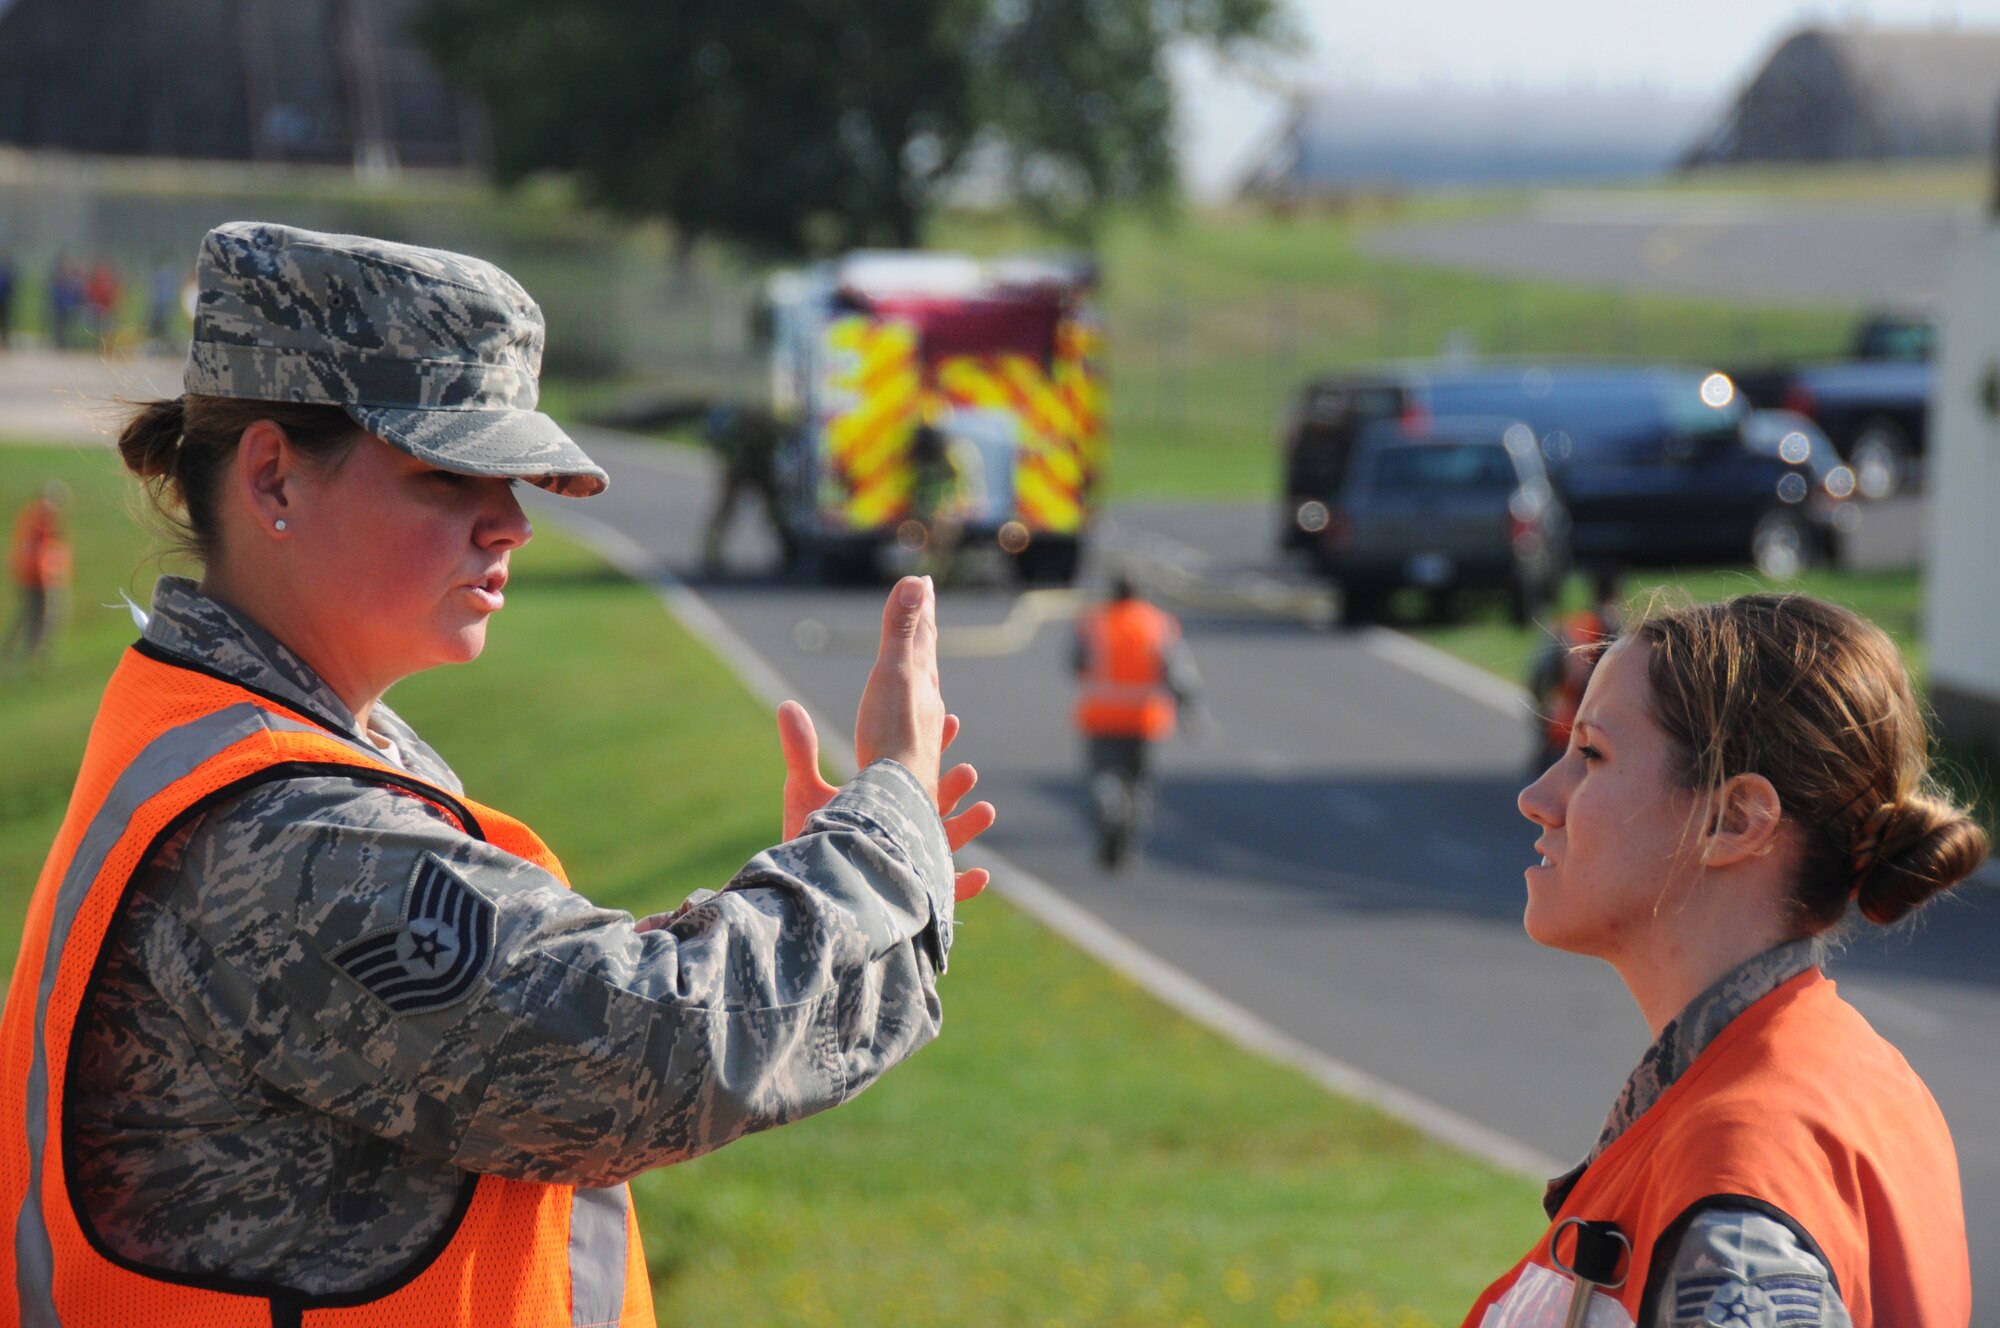 A picture of U.S. Air Force Tech. Sgt. Melissa Blackledge and Senior Airman Melissa Seel, aerospace medical technicians from the New Jersey Air National Guard's 177th Medical Group, discussing operation strategy during a simulated fuel spill.